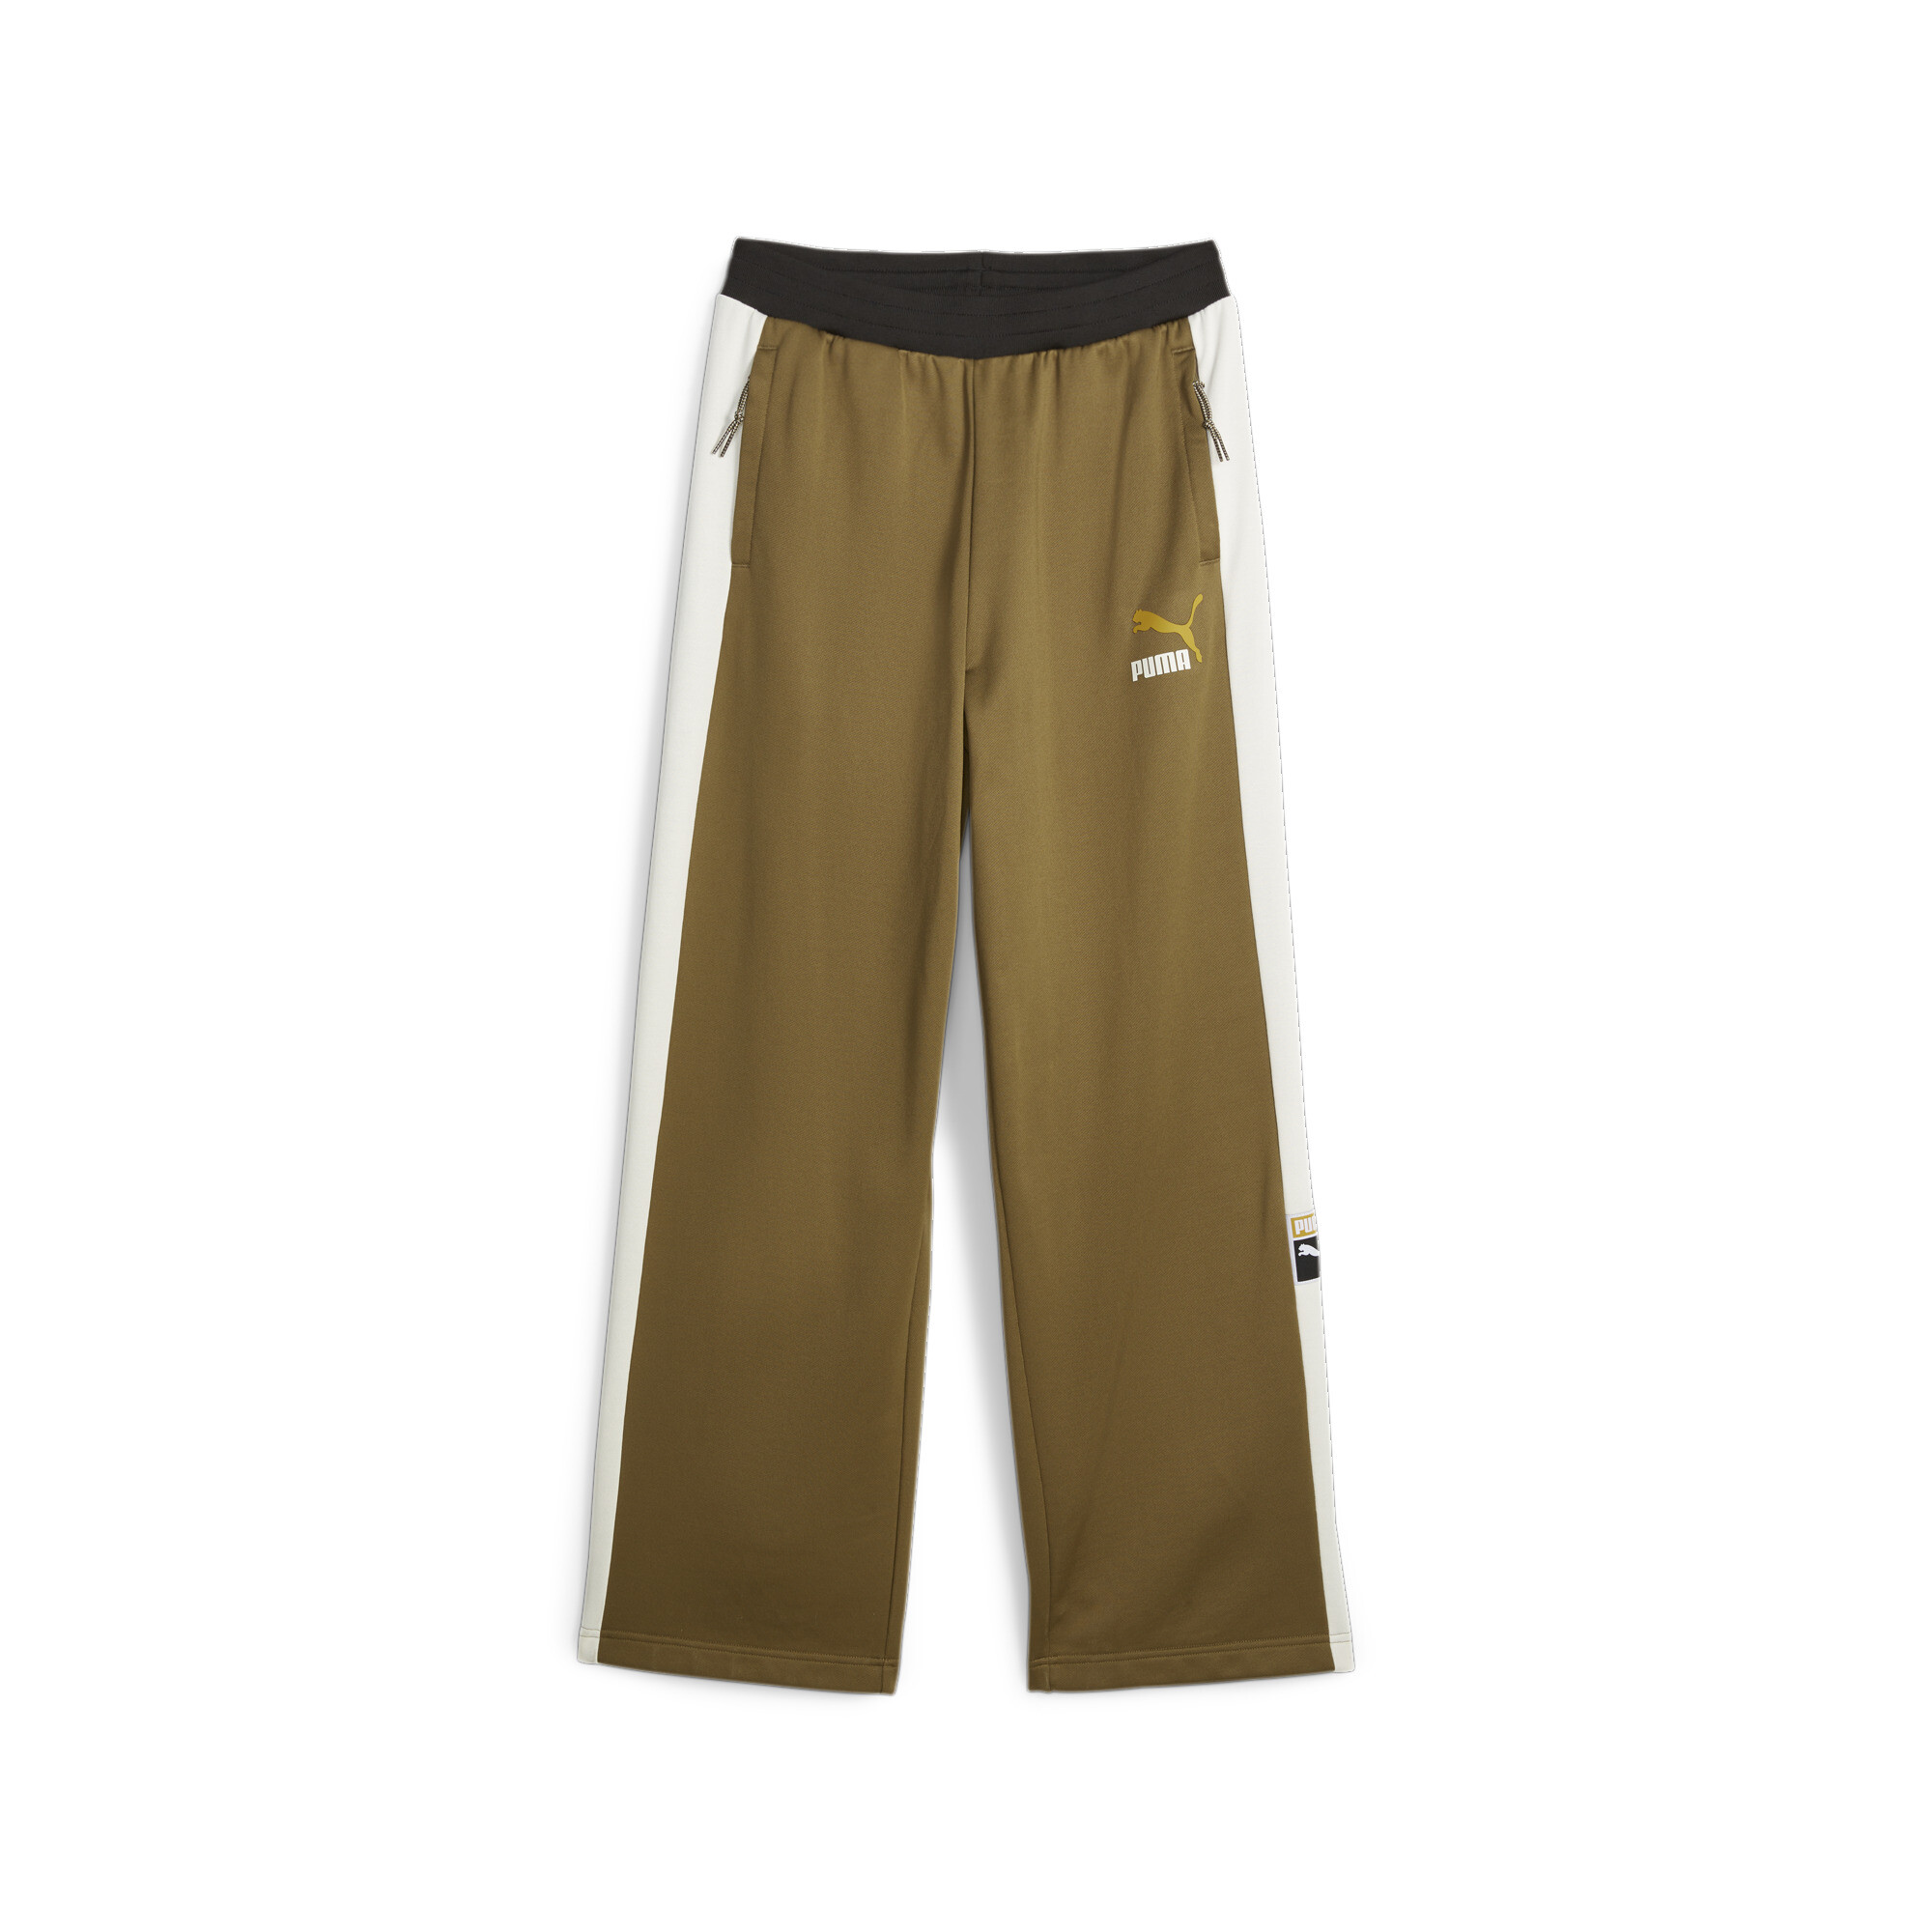 Men's Puma T7's Track Pants, Brown, Size S, Clothing